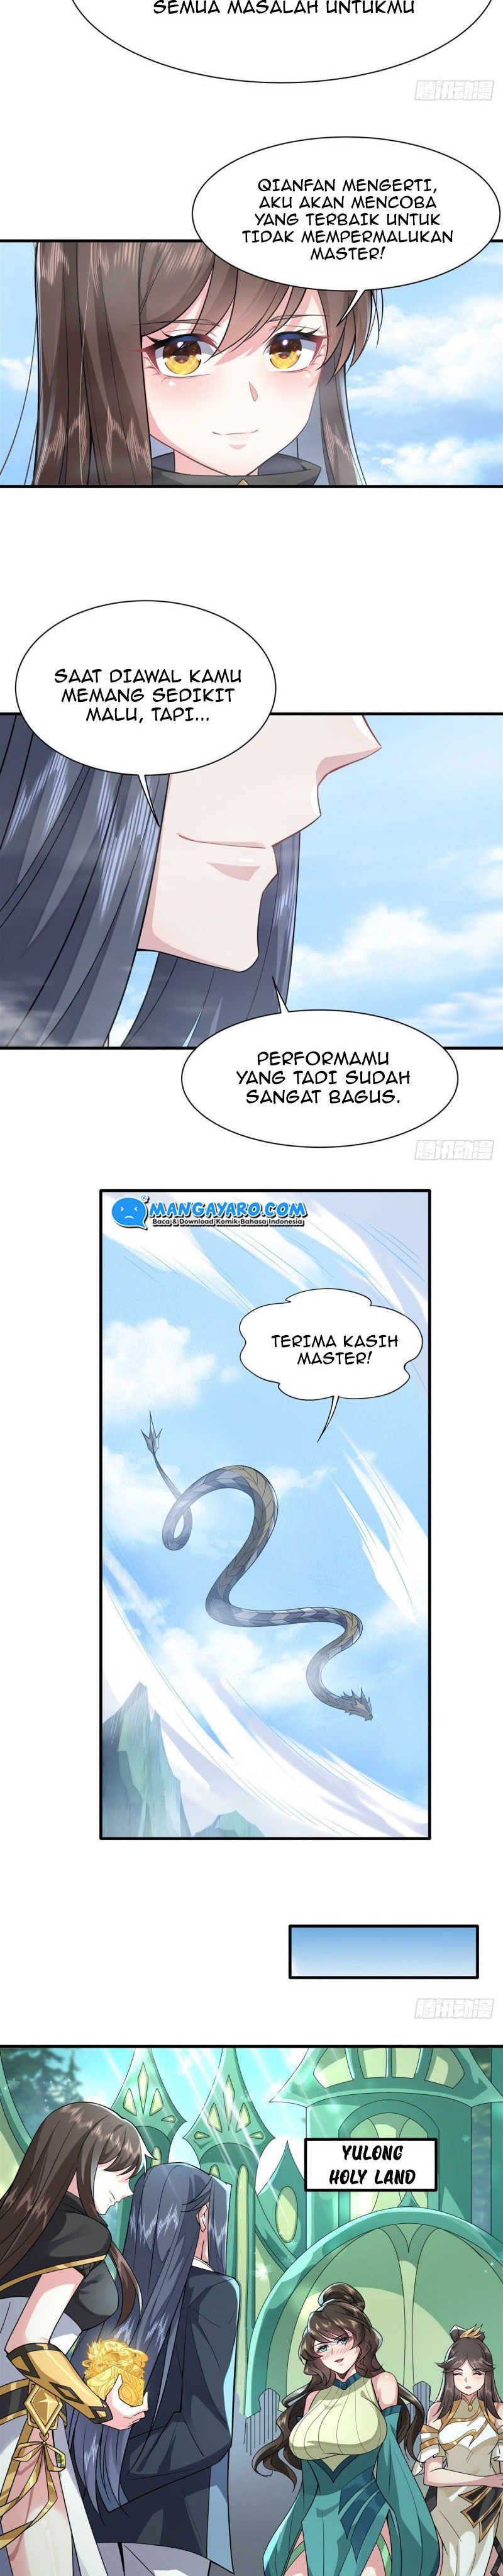 Dilarang COPAS - situs resmi www.mangacanblog.com - Komik my female apprentices are all big shots from the future 031 - chapter 31 32 Indonesia my female apprentices are all big shots from the future 031 - chapter 31 Terbaru 8|Baca Manga Komik Indonesia|Mangacan